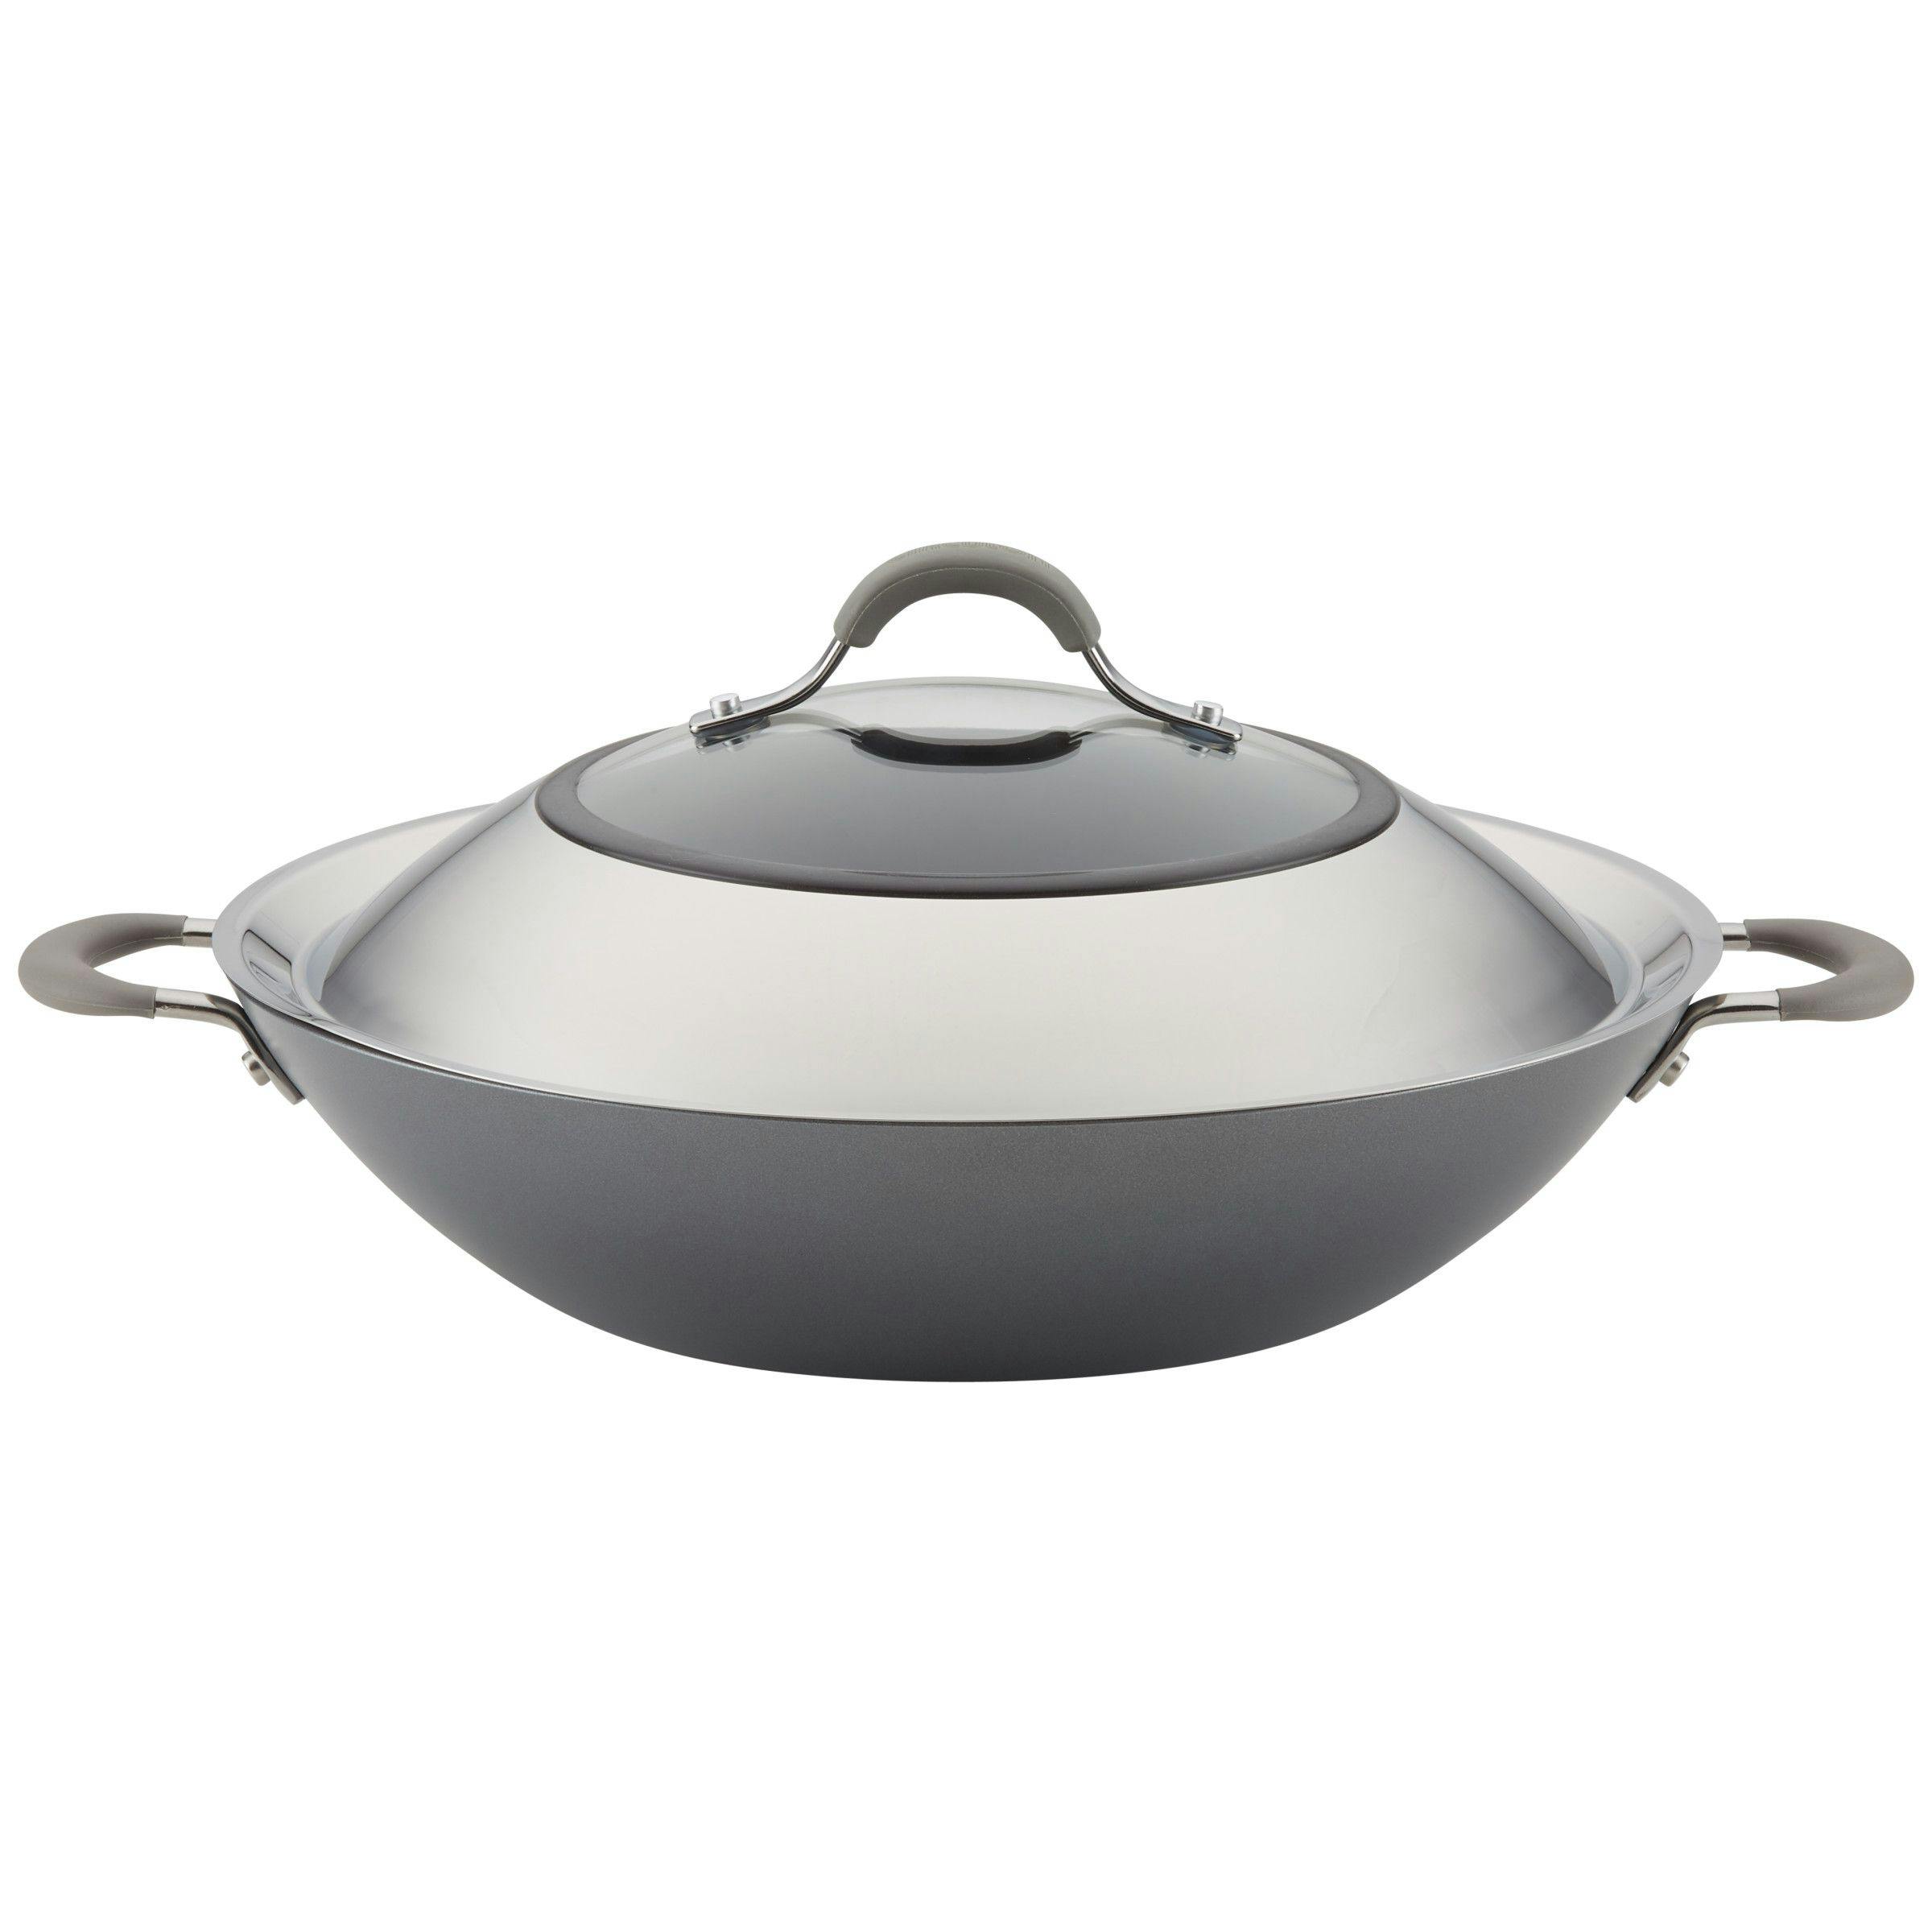 Circulon Elementum Hard-Anodized Nonstick Wok with Side Handles and Lid, 14-Inch, Oyster Gray